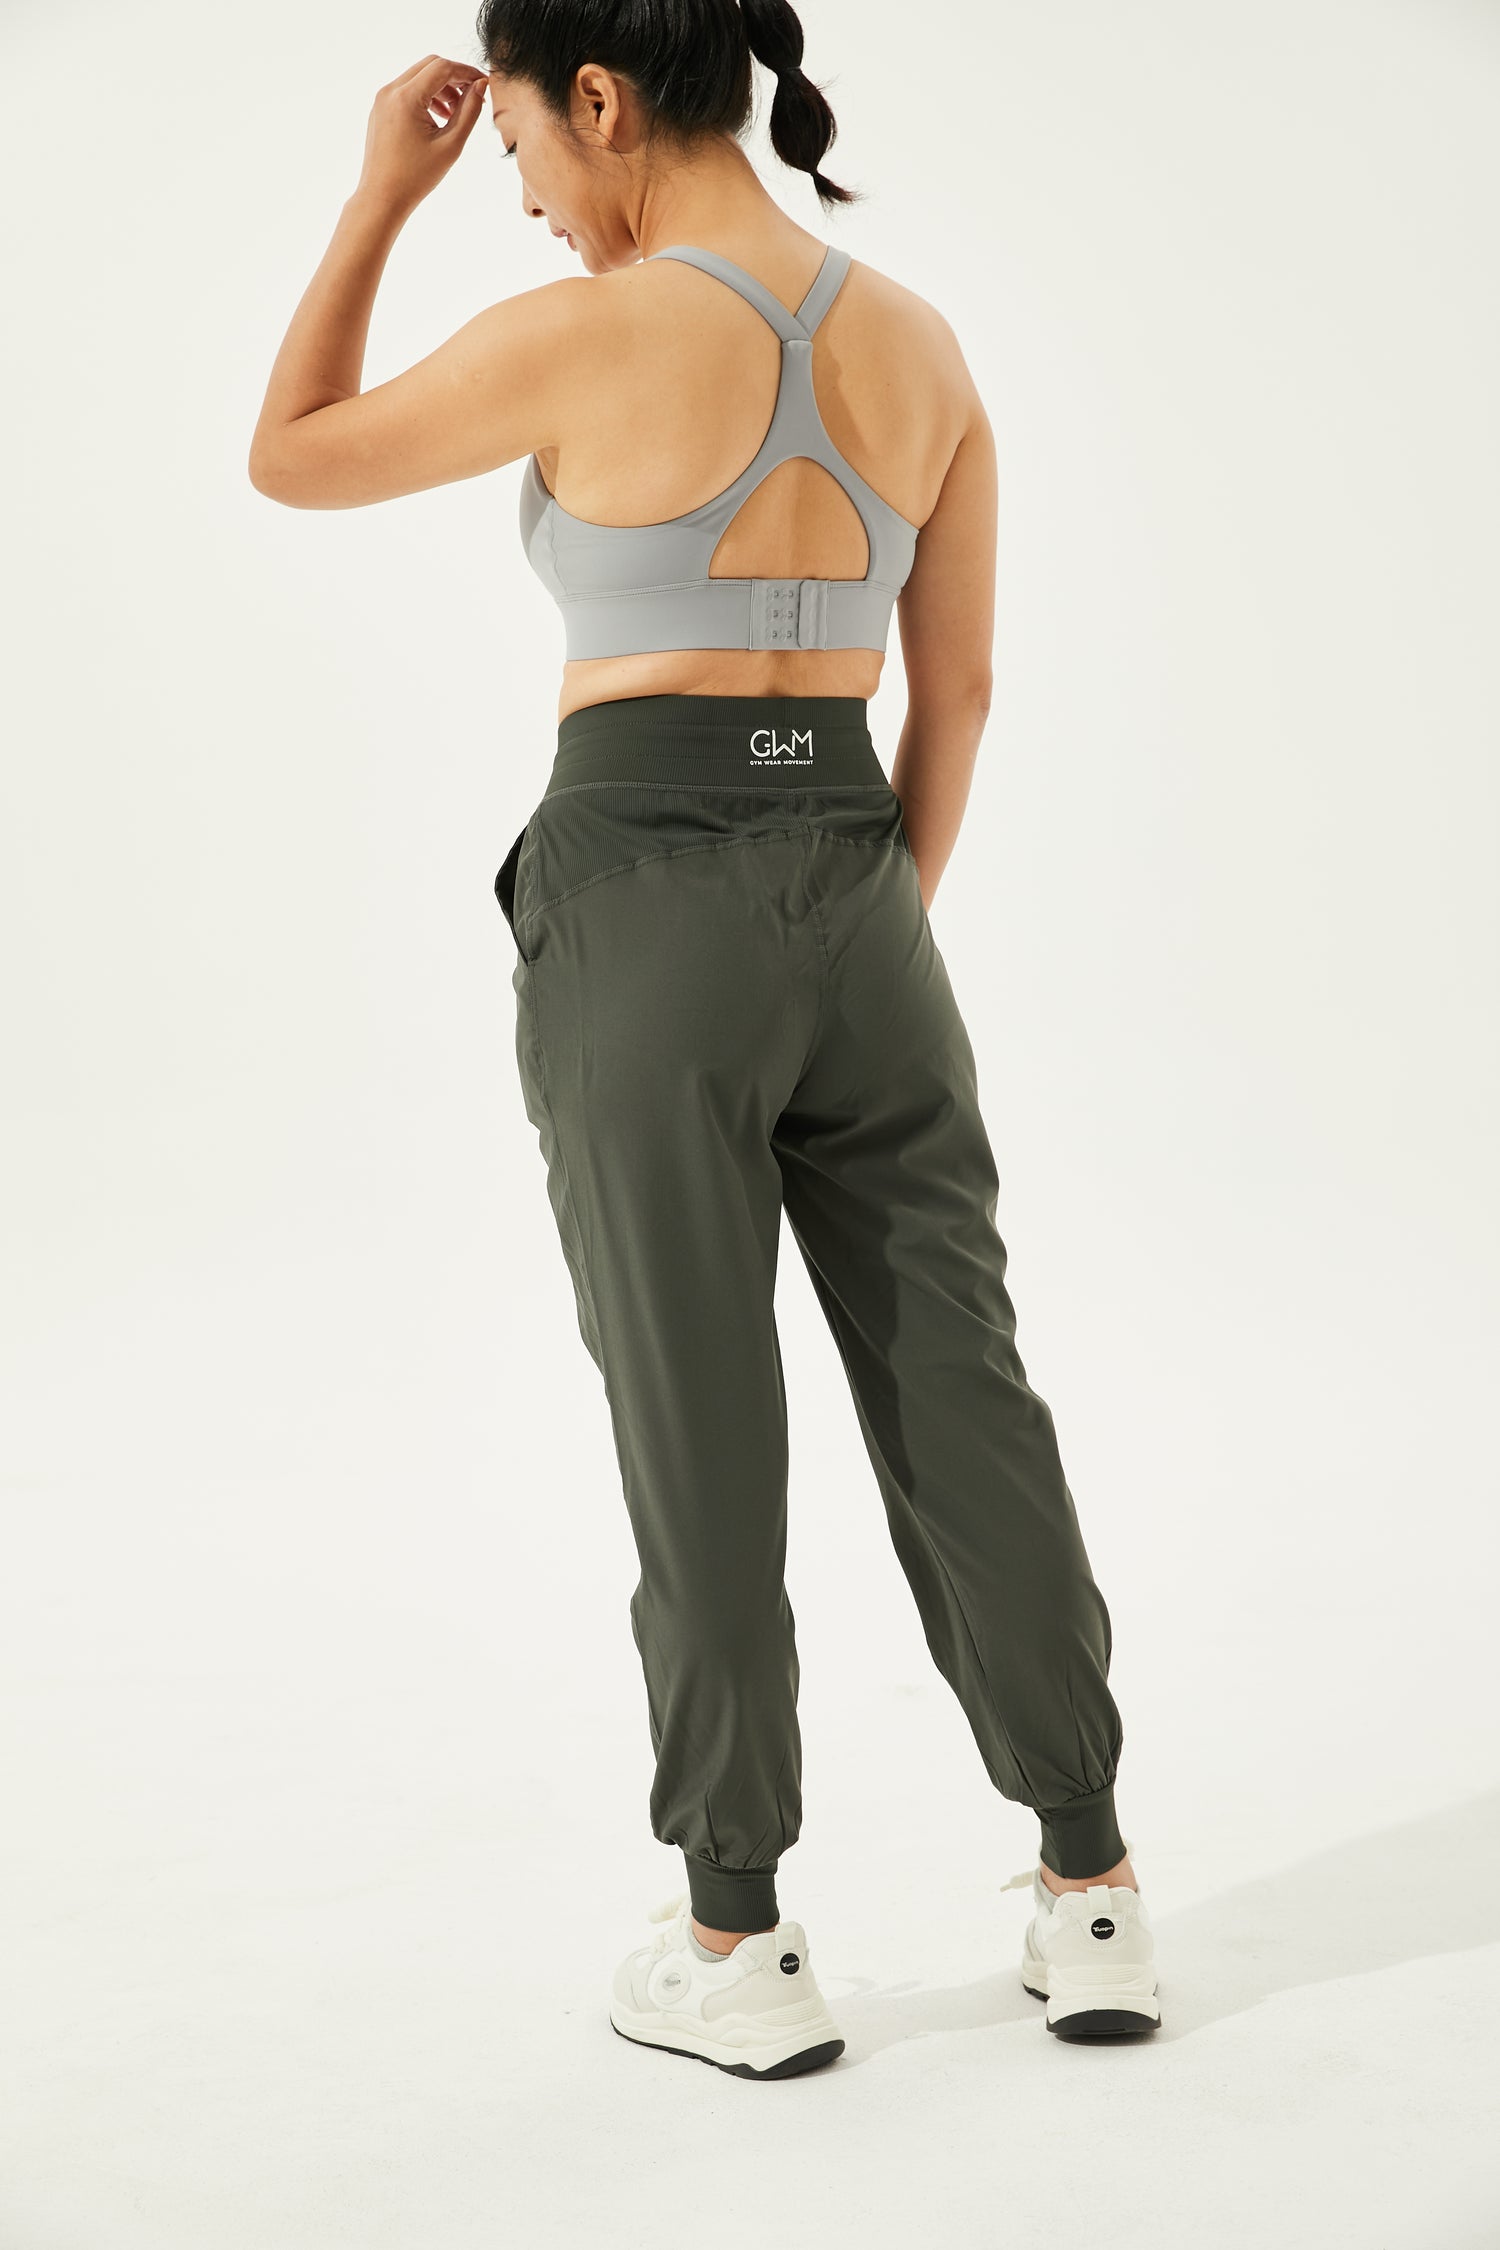 Buttery Soft Graceful Running Sports Bra With Clasps